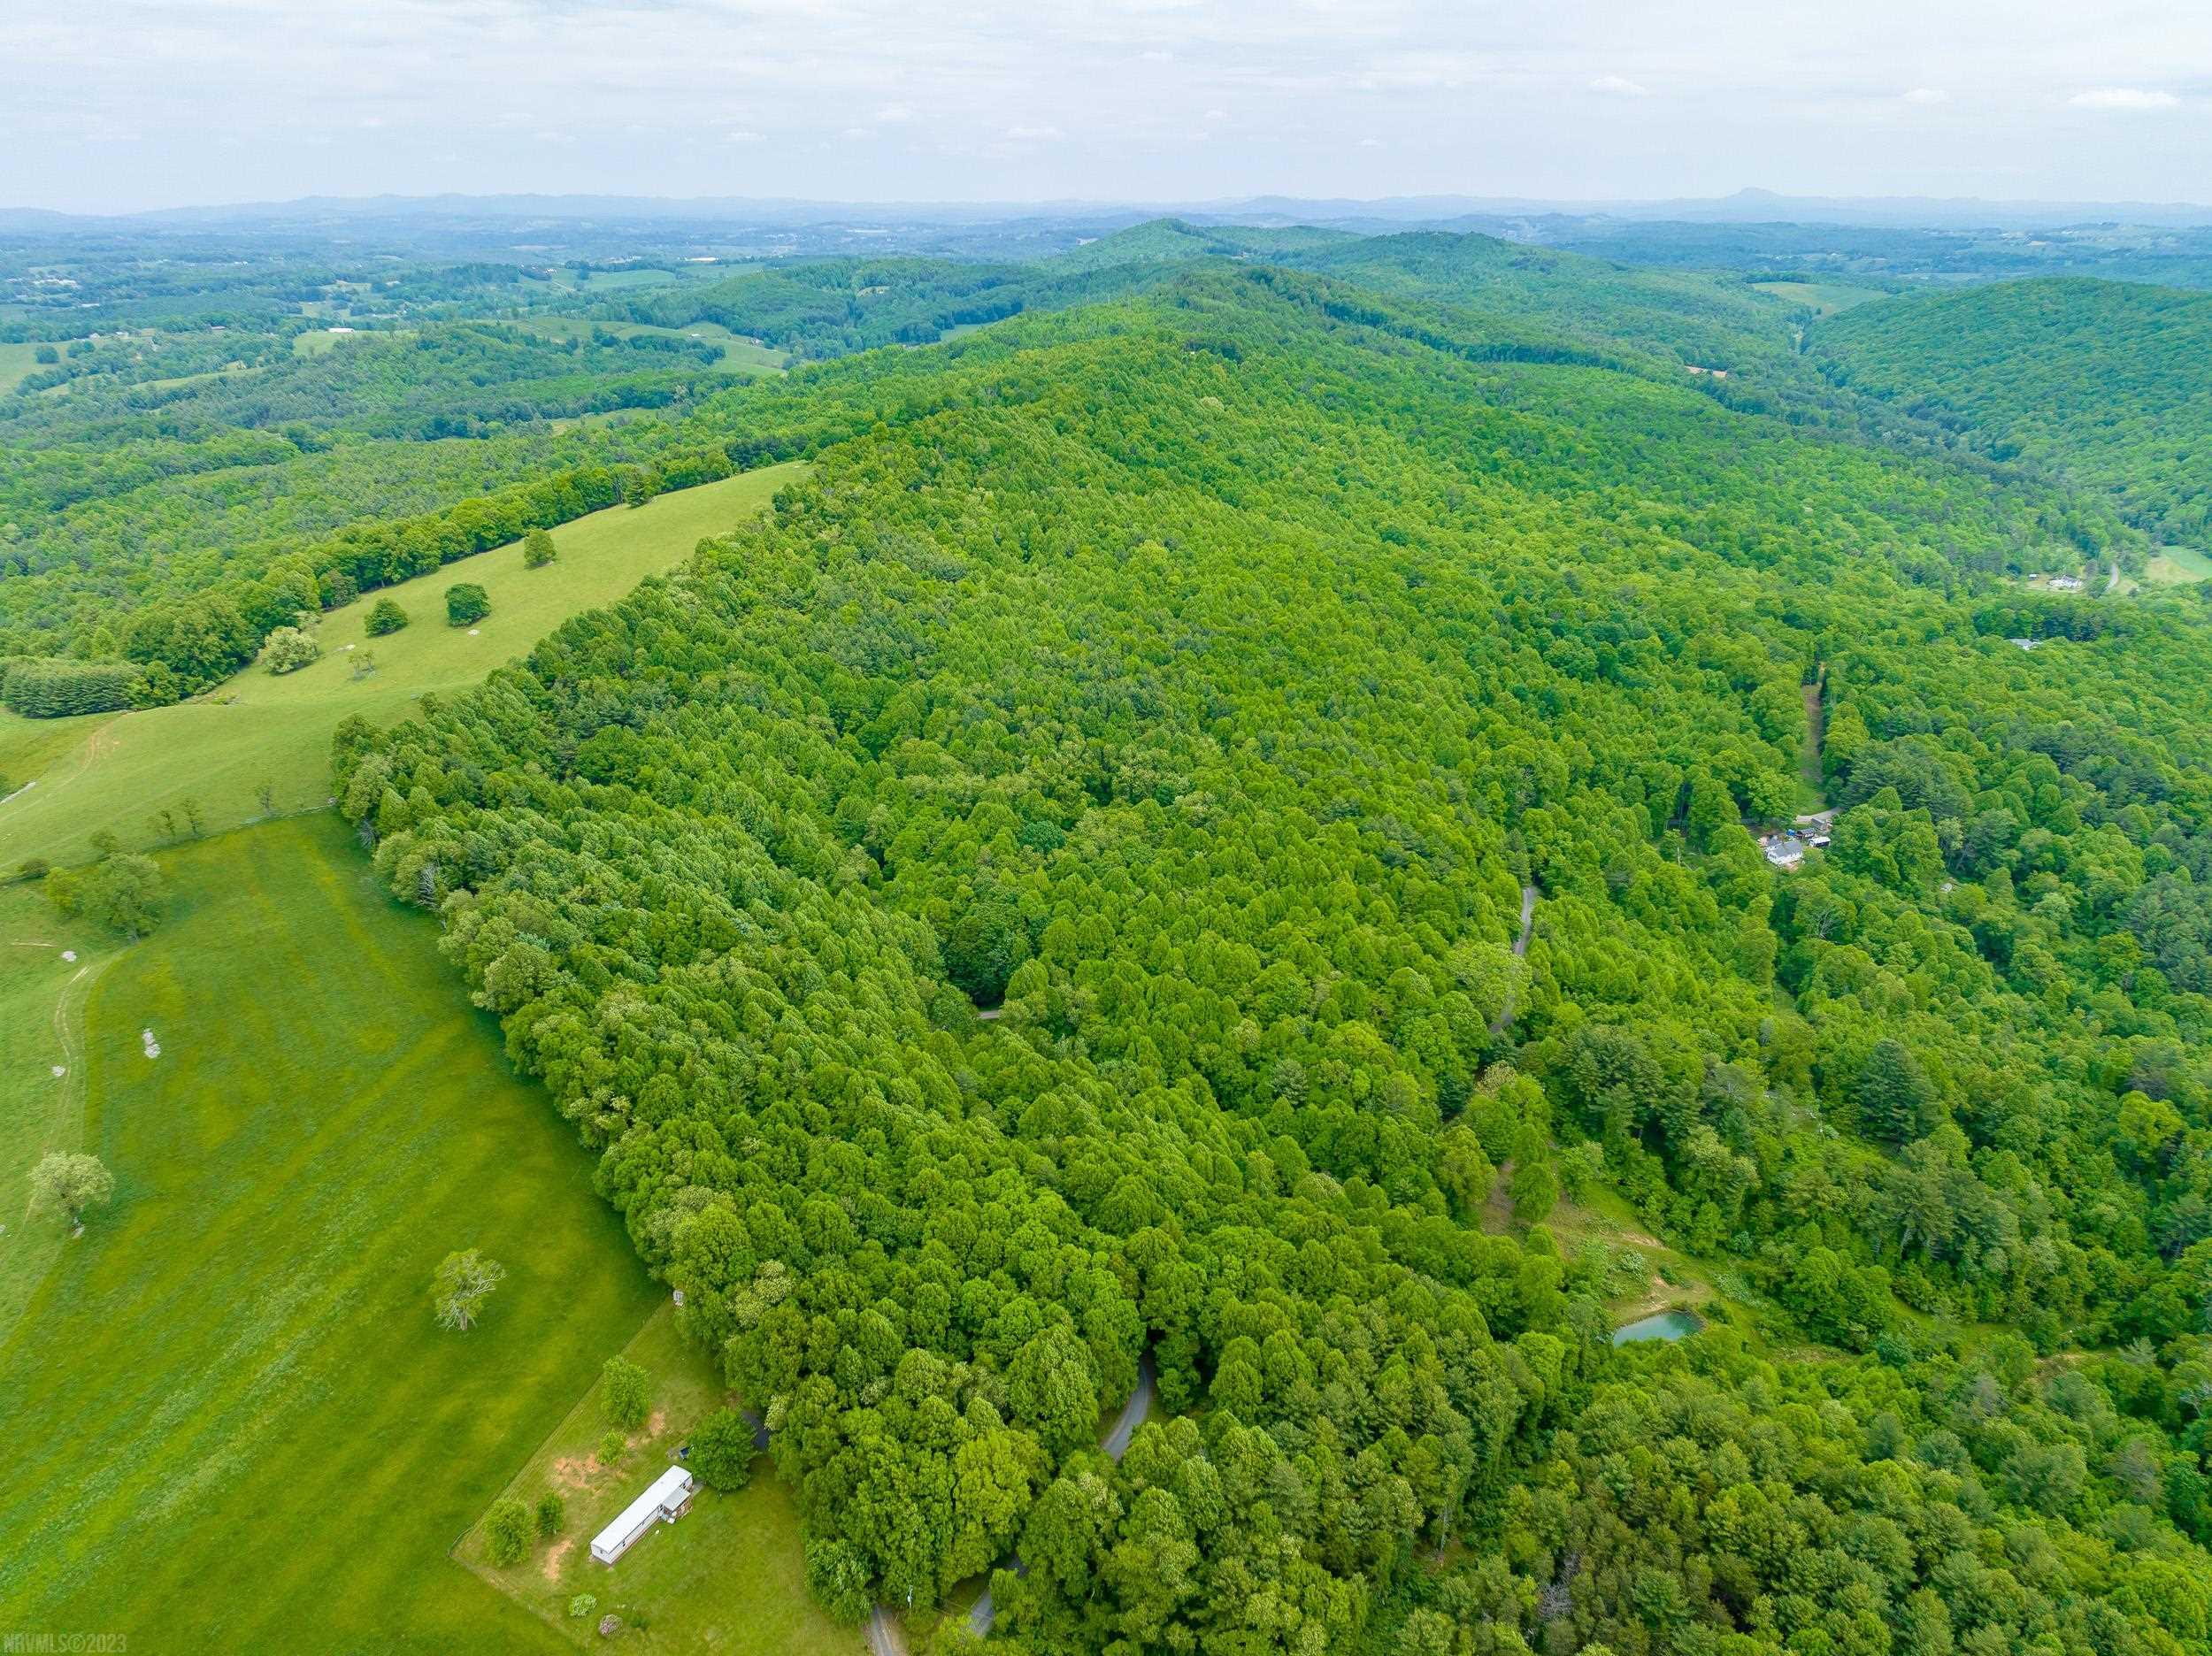 This 34.52 acre track of land was recently surveyed off of 59.5 acre track. All 59.5 acres are available, see MLS #418158. Property is on both sides of the road with the majority which on the left side and lays very nice. There is a spring head and a small branch. You can probably build a nice pond. Property has southern exposure and a lot of timber that will most likely be marketable within a few years. The front corner of the property joins the Crooked Creek Wildlife Management Area which is 1796 acres of forest and open land offering varied hunting opportunities for deer, turkey, squirrel, etc. It has 2.8 miles of native trout water and 3.5 miles of stocked rainbow and brown trout. All of this available within a few steps of a wonderful homestead or vacation/recreational property. Enjoy everything nature and the area have to offer. Just minutes from I-77, Blue Ridge Parkway, New River & Trail, wineries and everything the VA Blue Ridge Mountains have to offer. Close to Galax